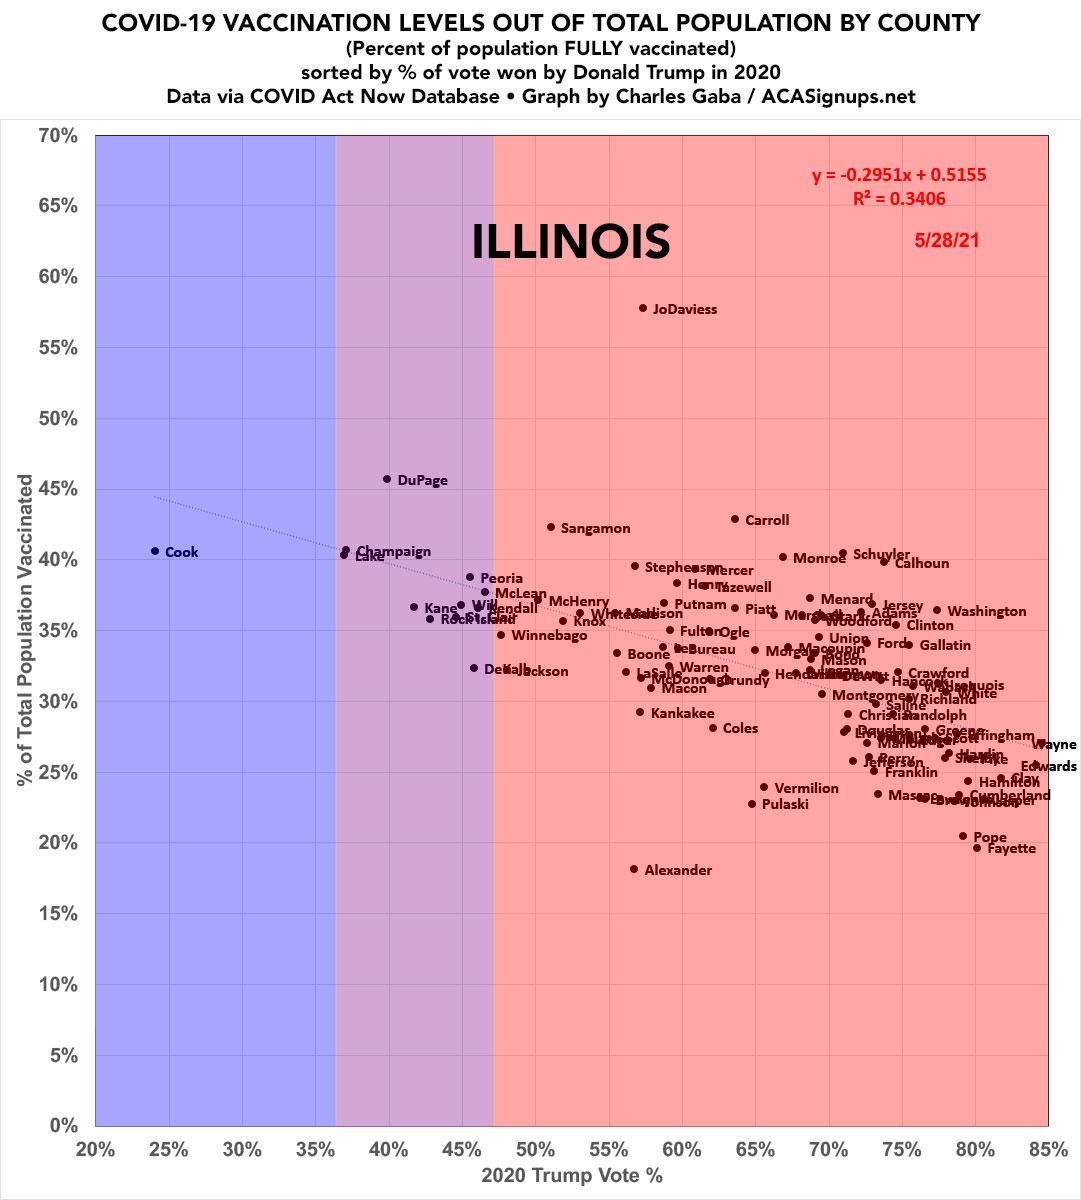 Illinois Vaccinations by County & Partisan Lean - label view